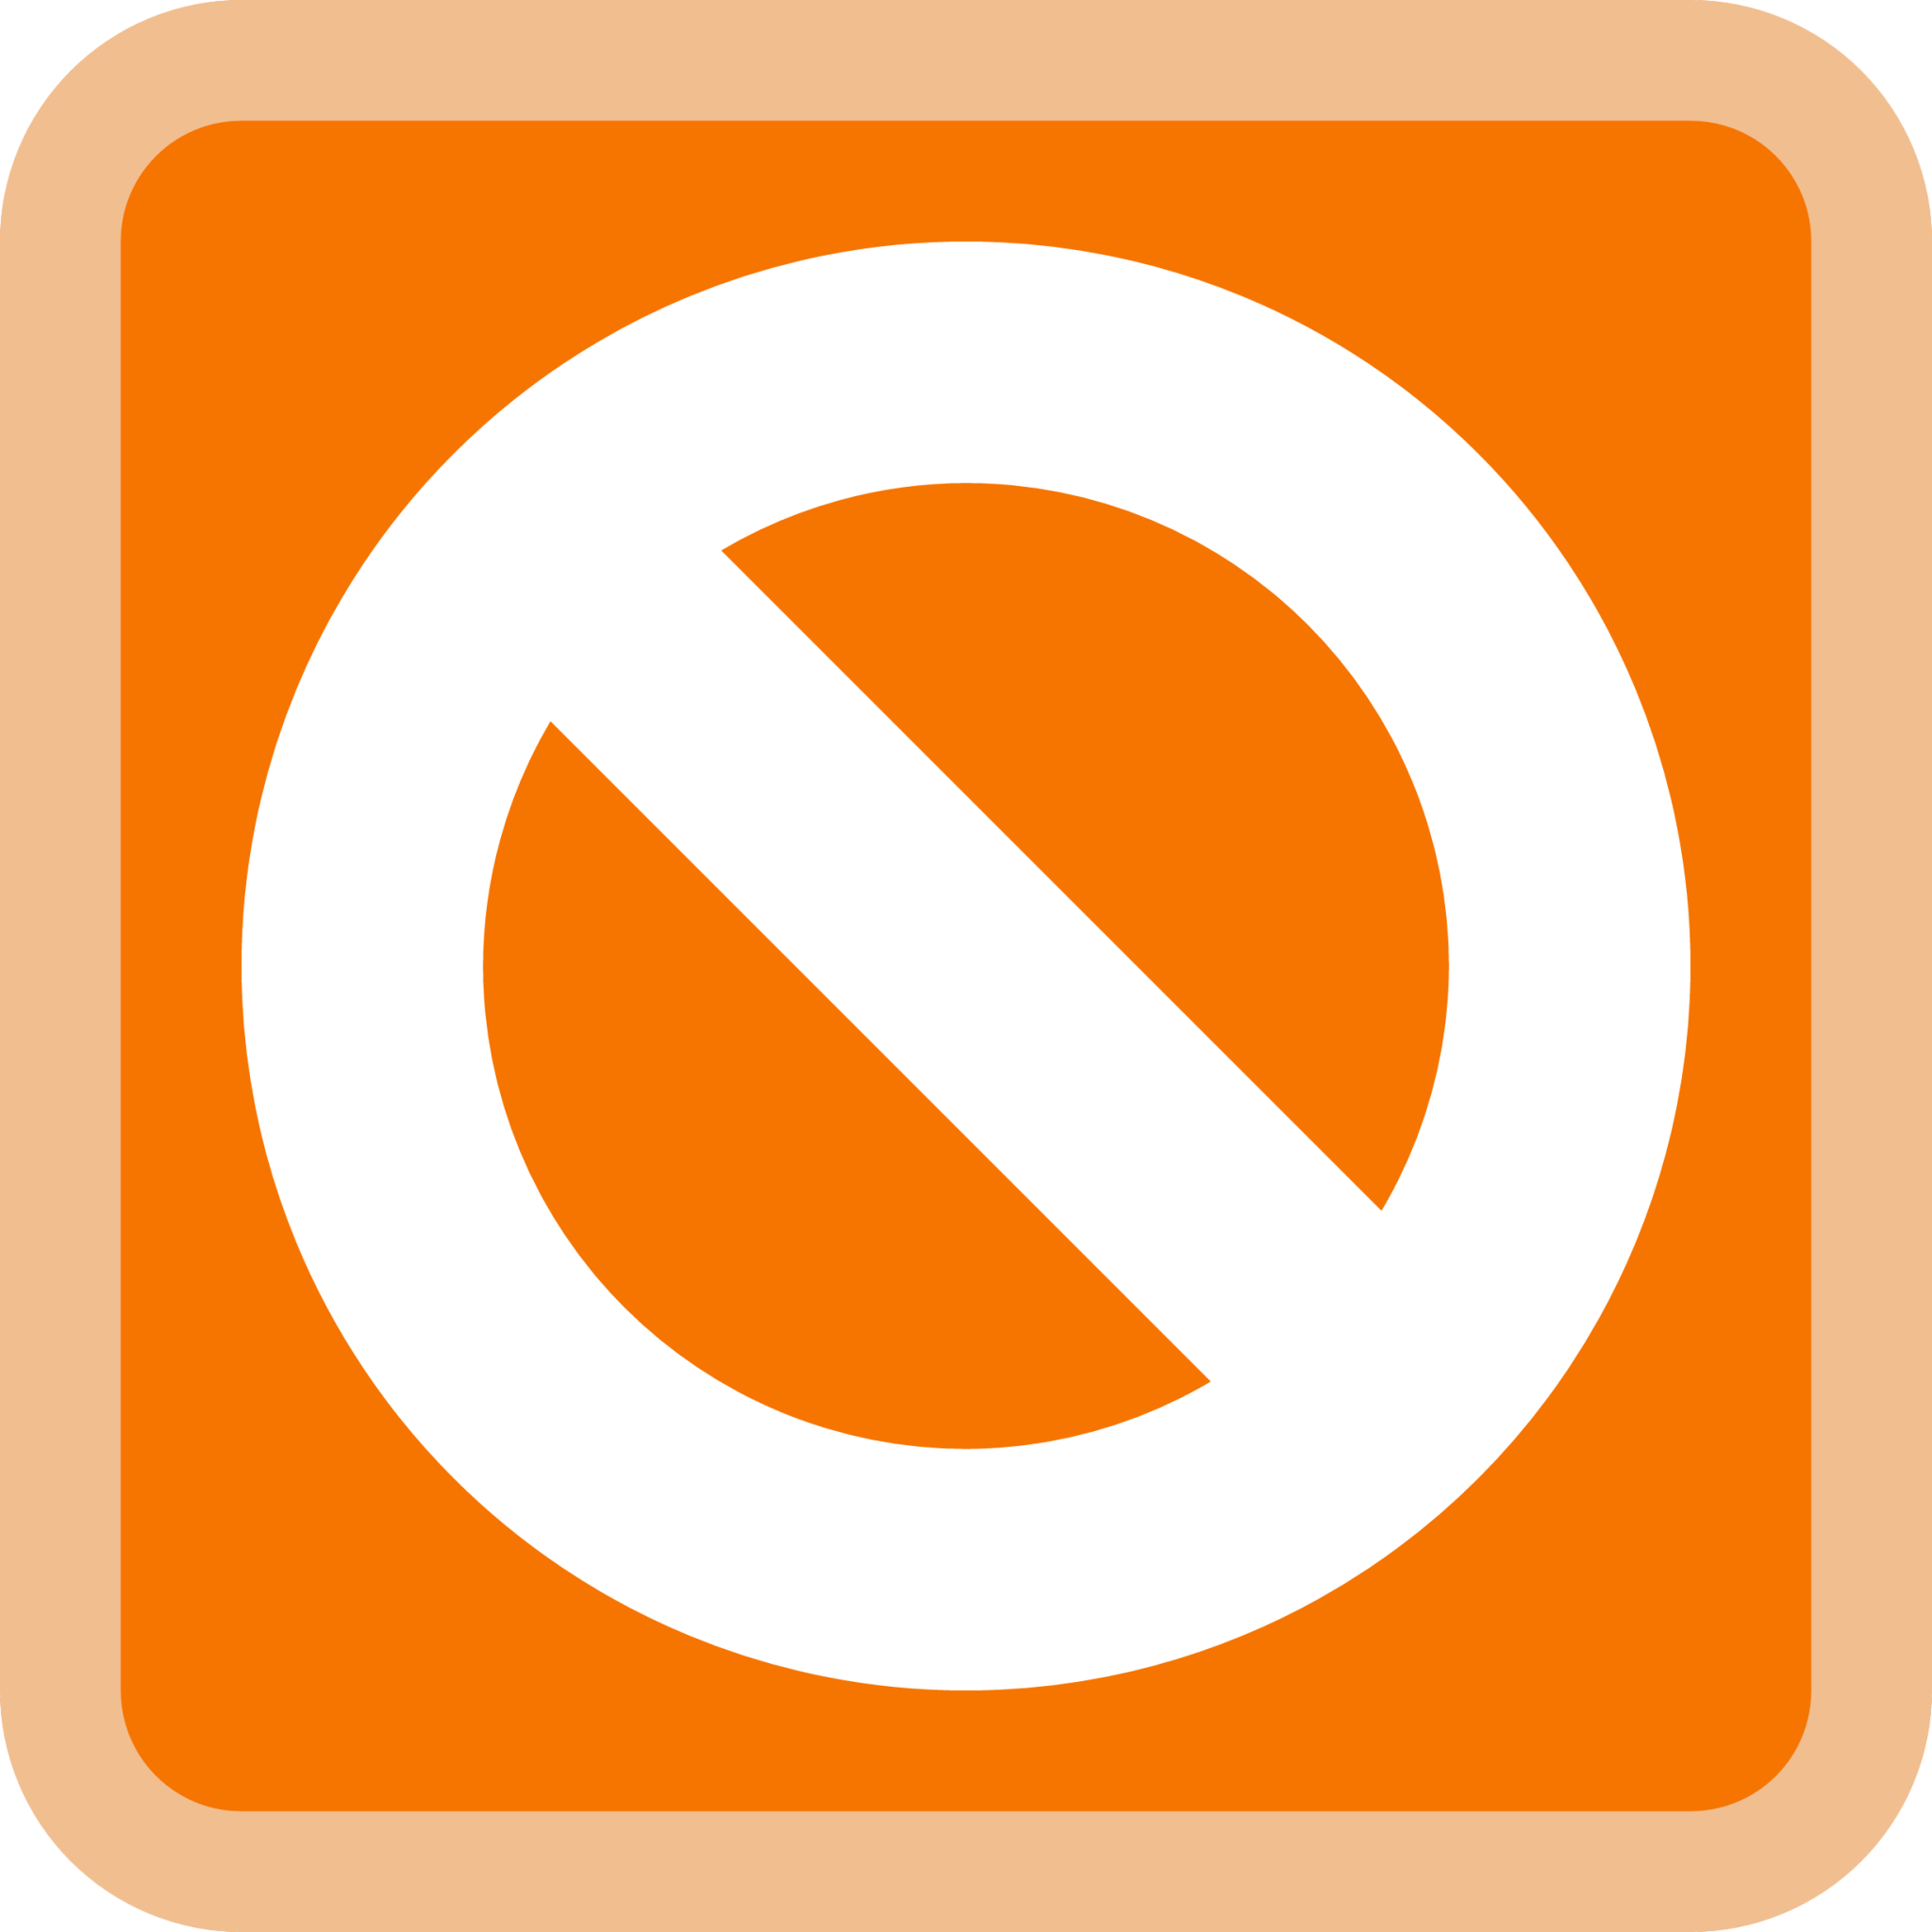 package available locked icon